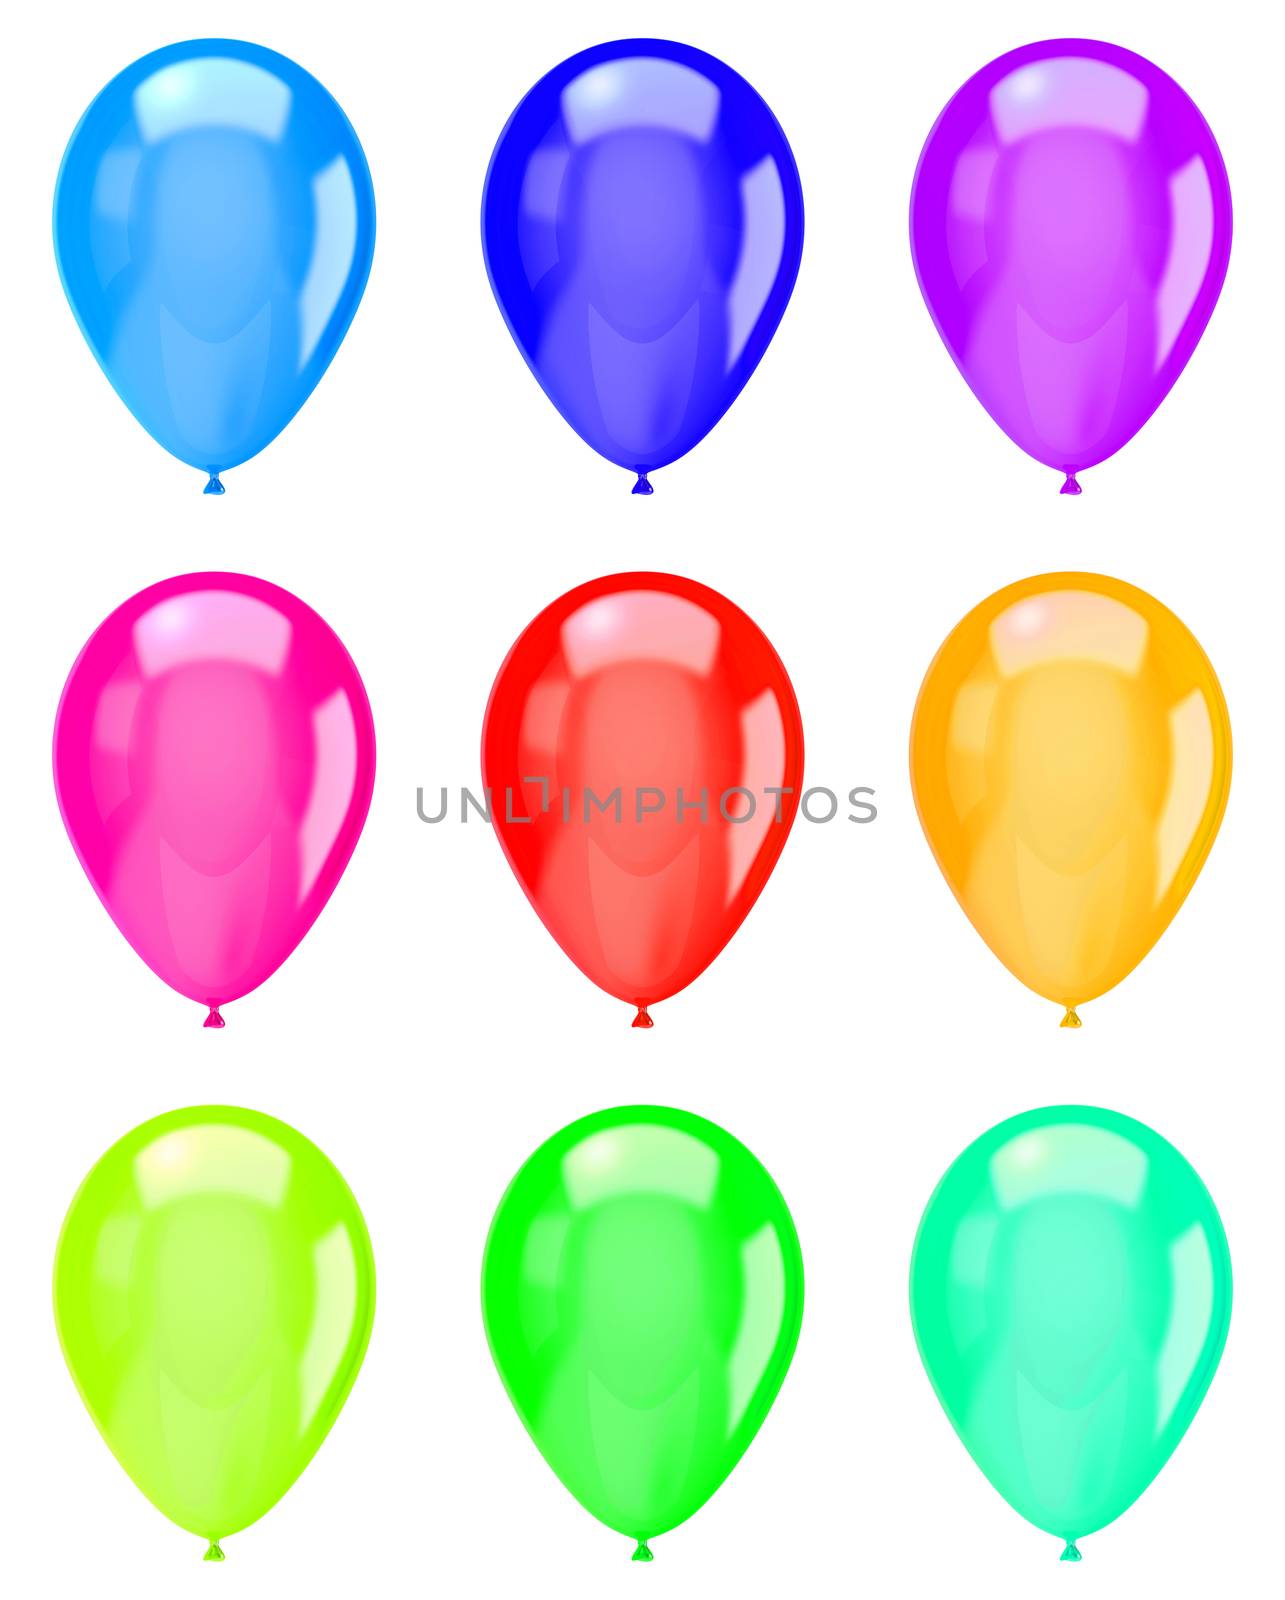 Vibrant Color Isolated Balloons Collection on White Background Illustration